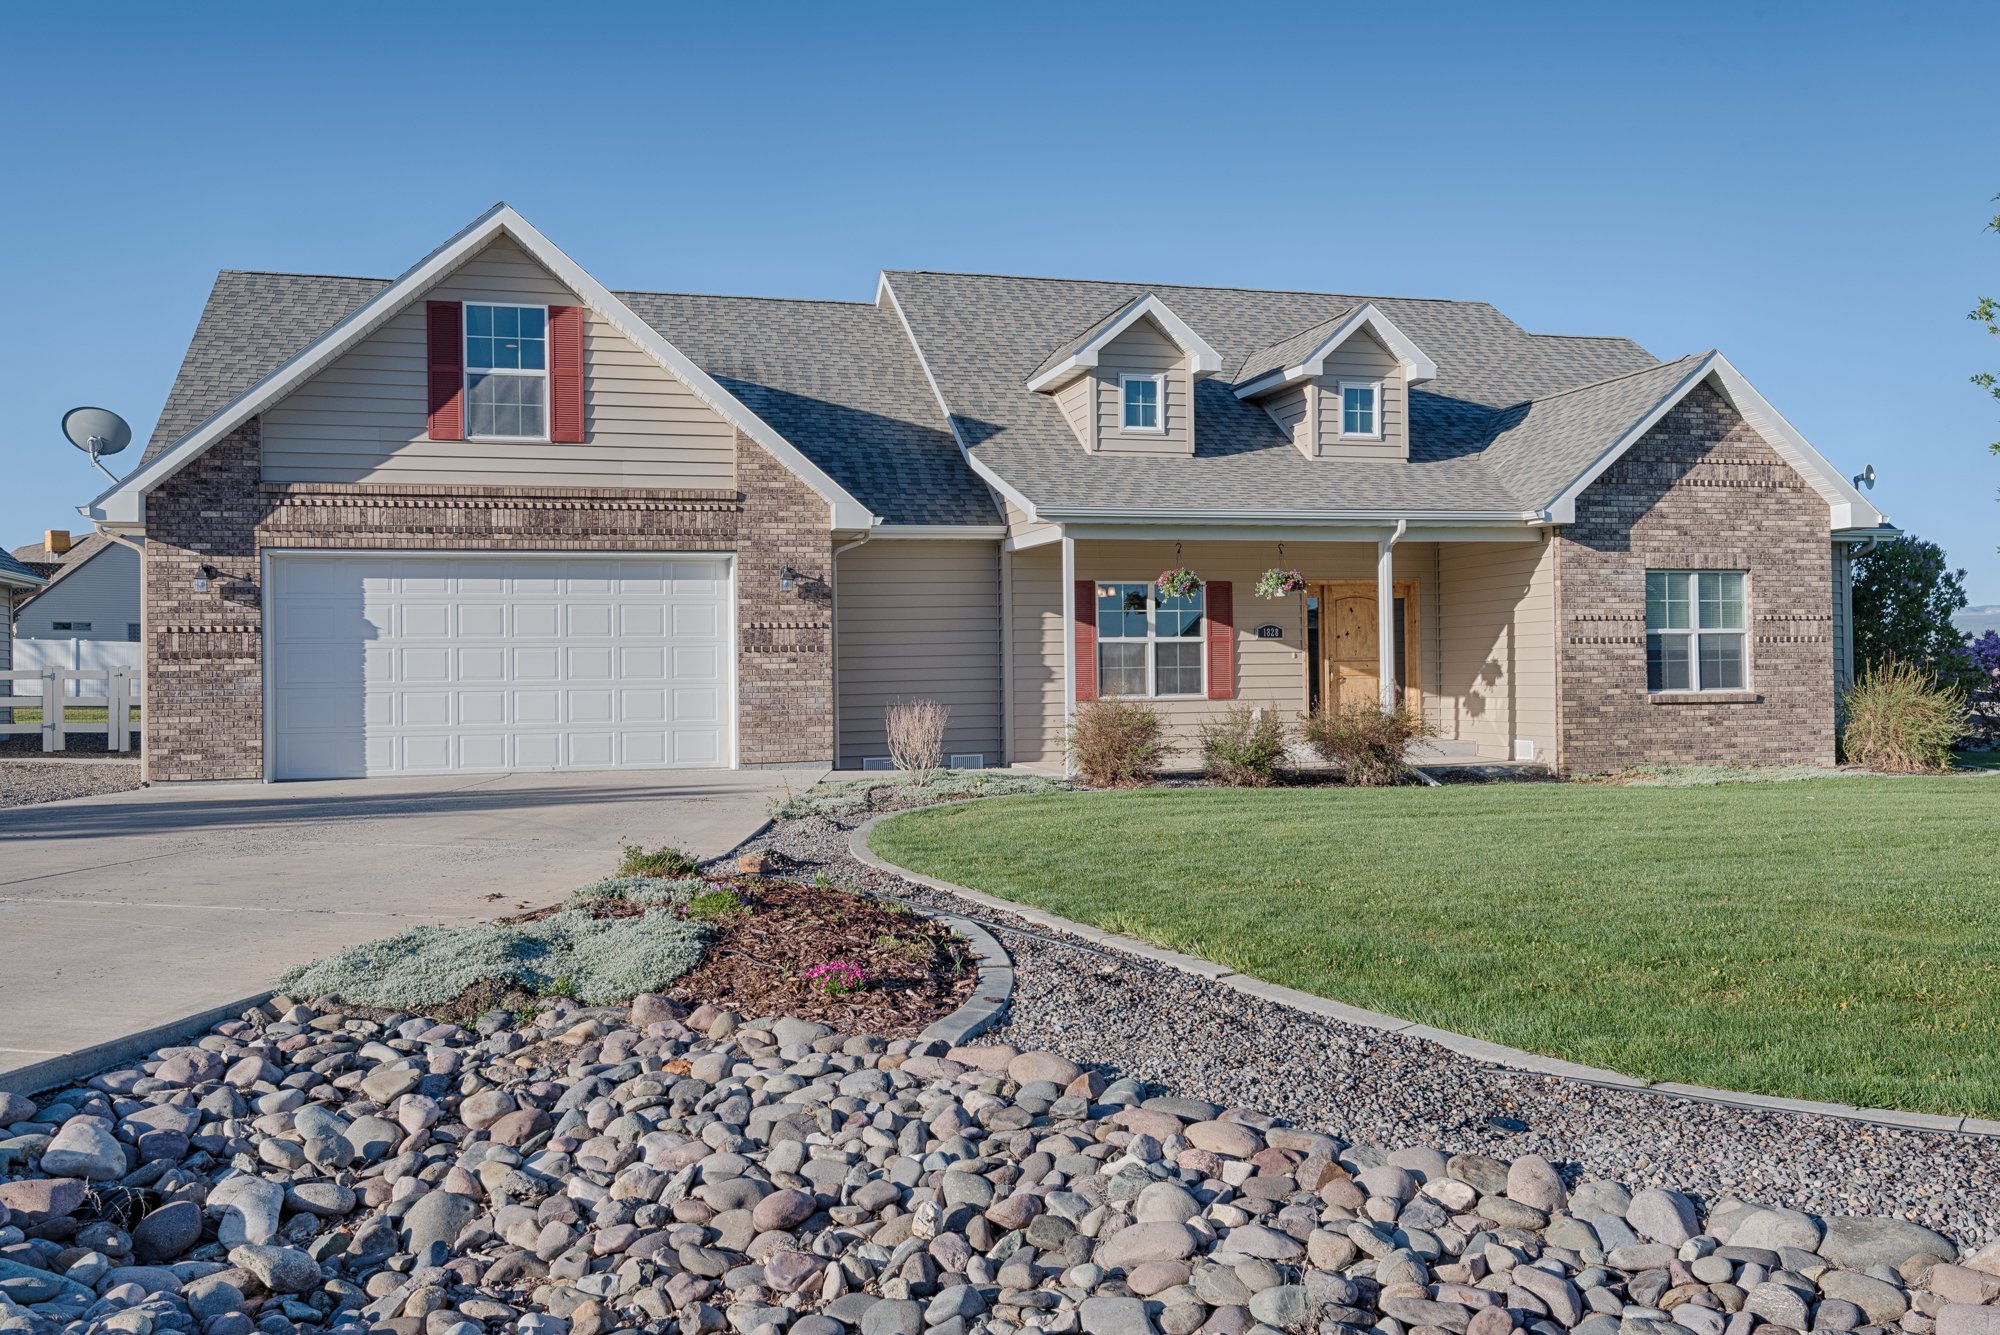 Home for Sale with Landscaping - 1828 Senate St Montrose, CO 81401 - Atha Team Real Estate